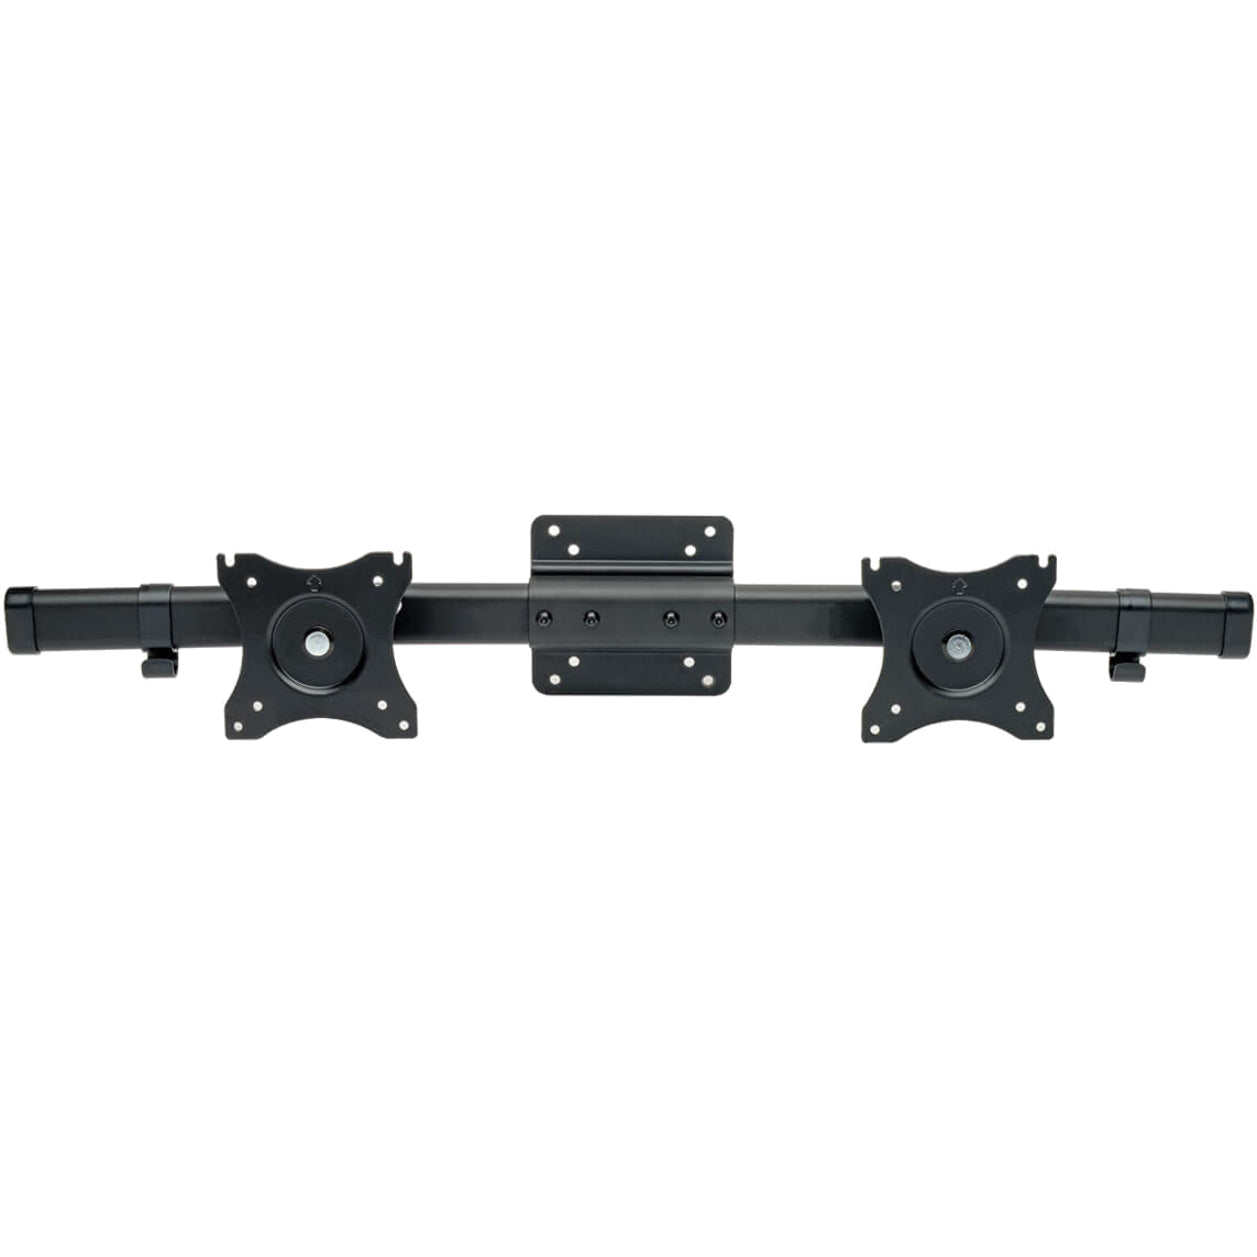 Tripp Lite DMA1327SD Universal Dual-Monitor Mount Adapter, Mounting Kit for Flat Panel Display and TV, 22 lb Maximum Load Capacity, 27" Maximum Screen Size Supported